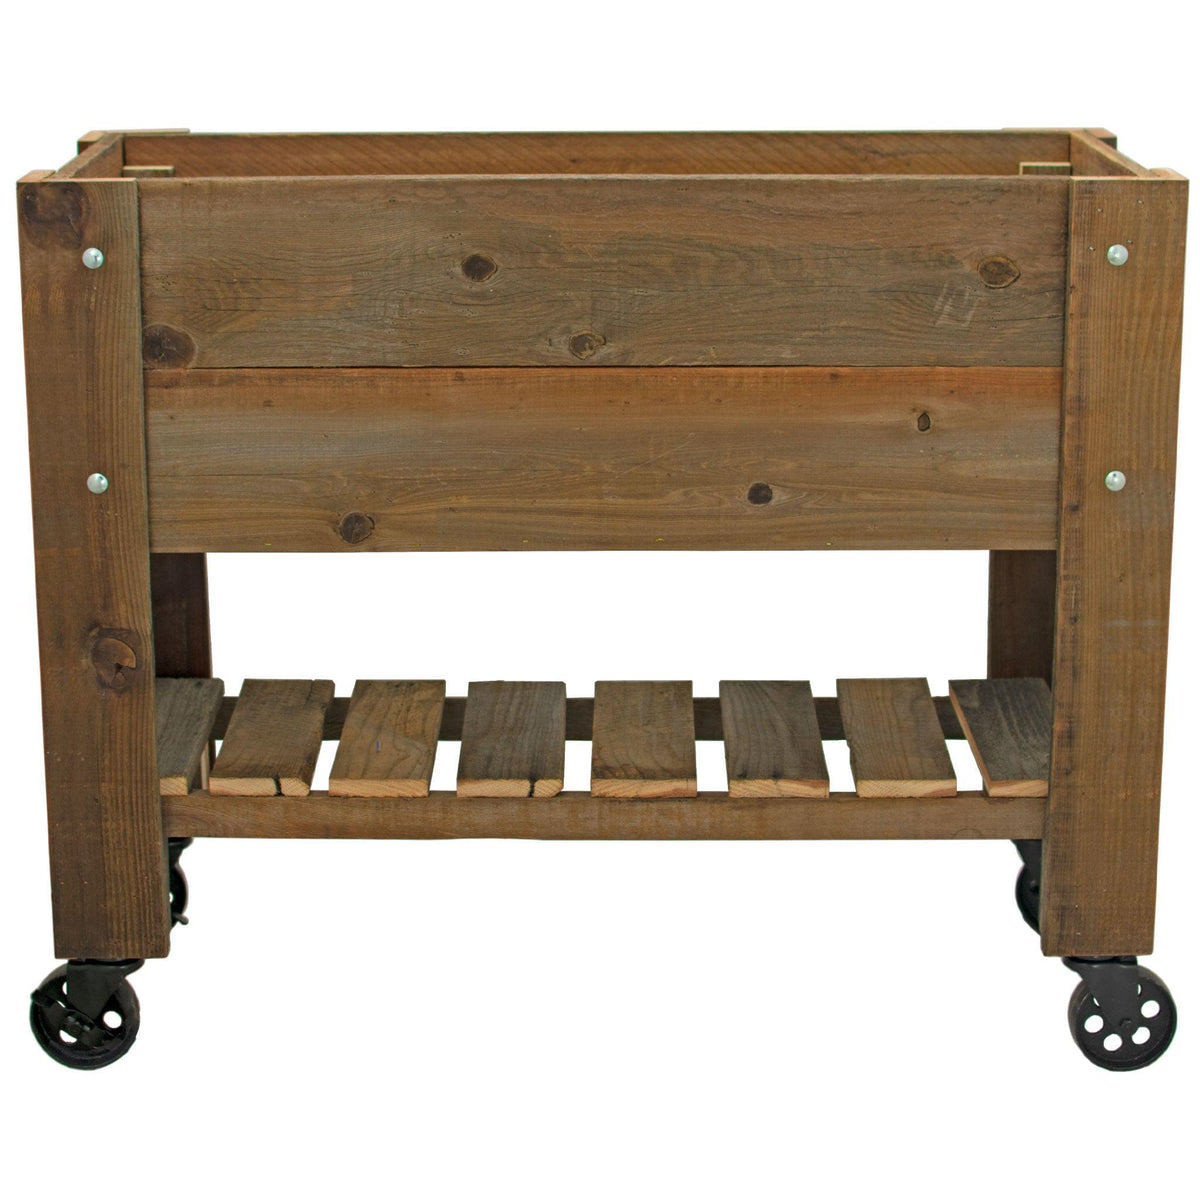 Introducing Lee Display's brand-new Redwood Raised Bed Planter Box with Shelf & Vintage Black Casters   Create the perfect little garden inside your home this summer.  On sale now at leedisplay.com